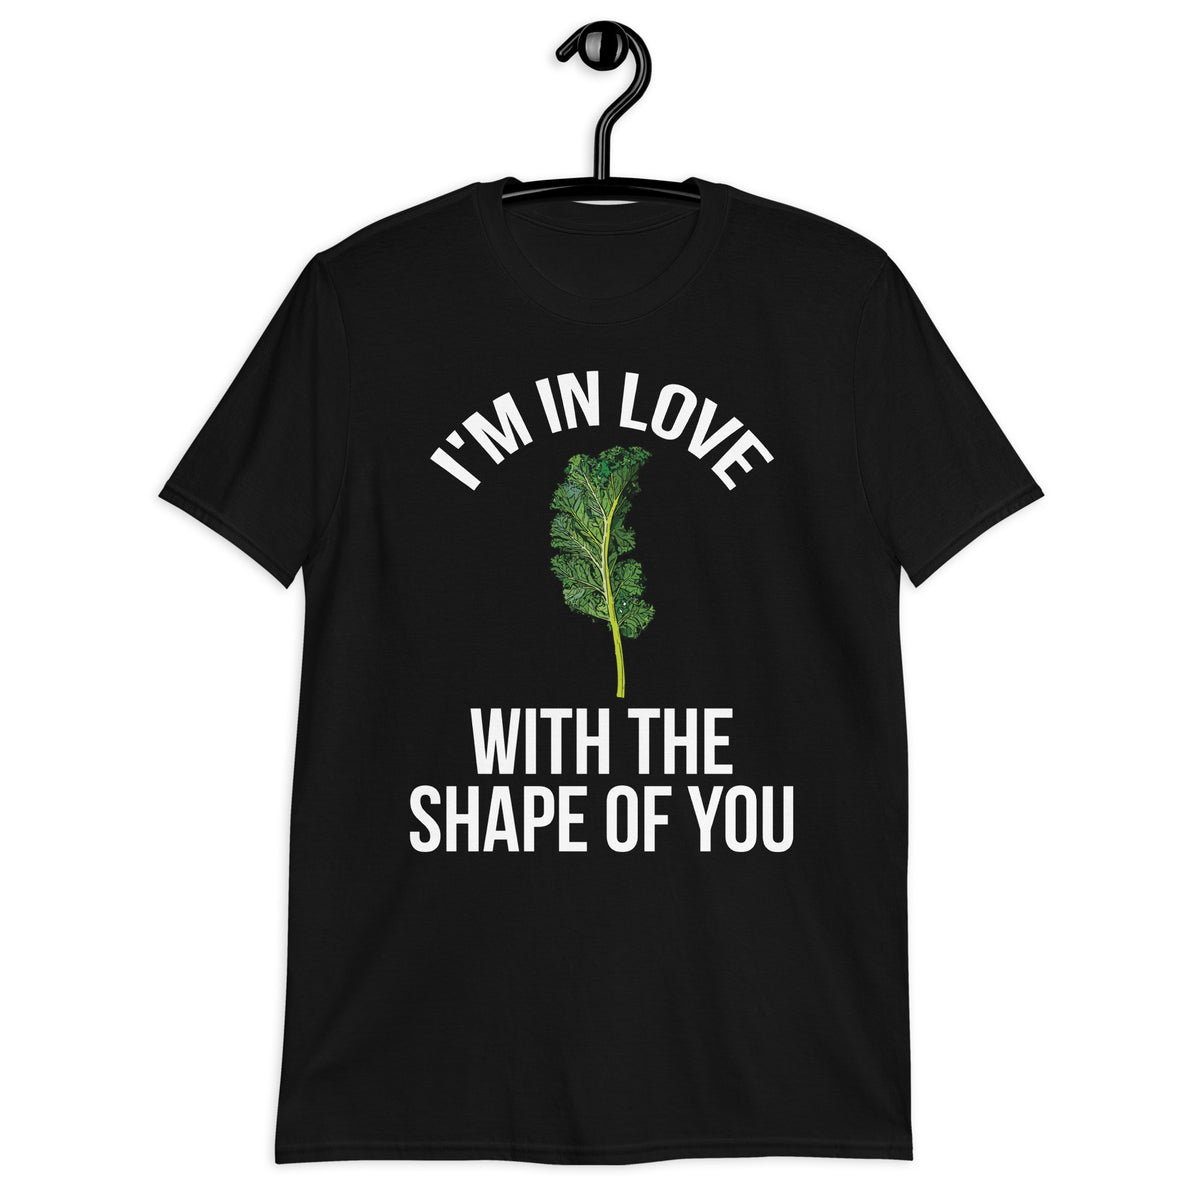 I'M IN LOVE WITH SHAPE OF YOU...KALE Short-Sleeve  T-Shirt